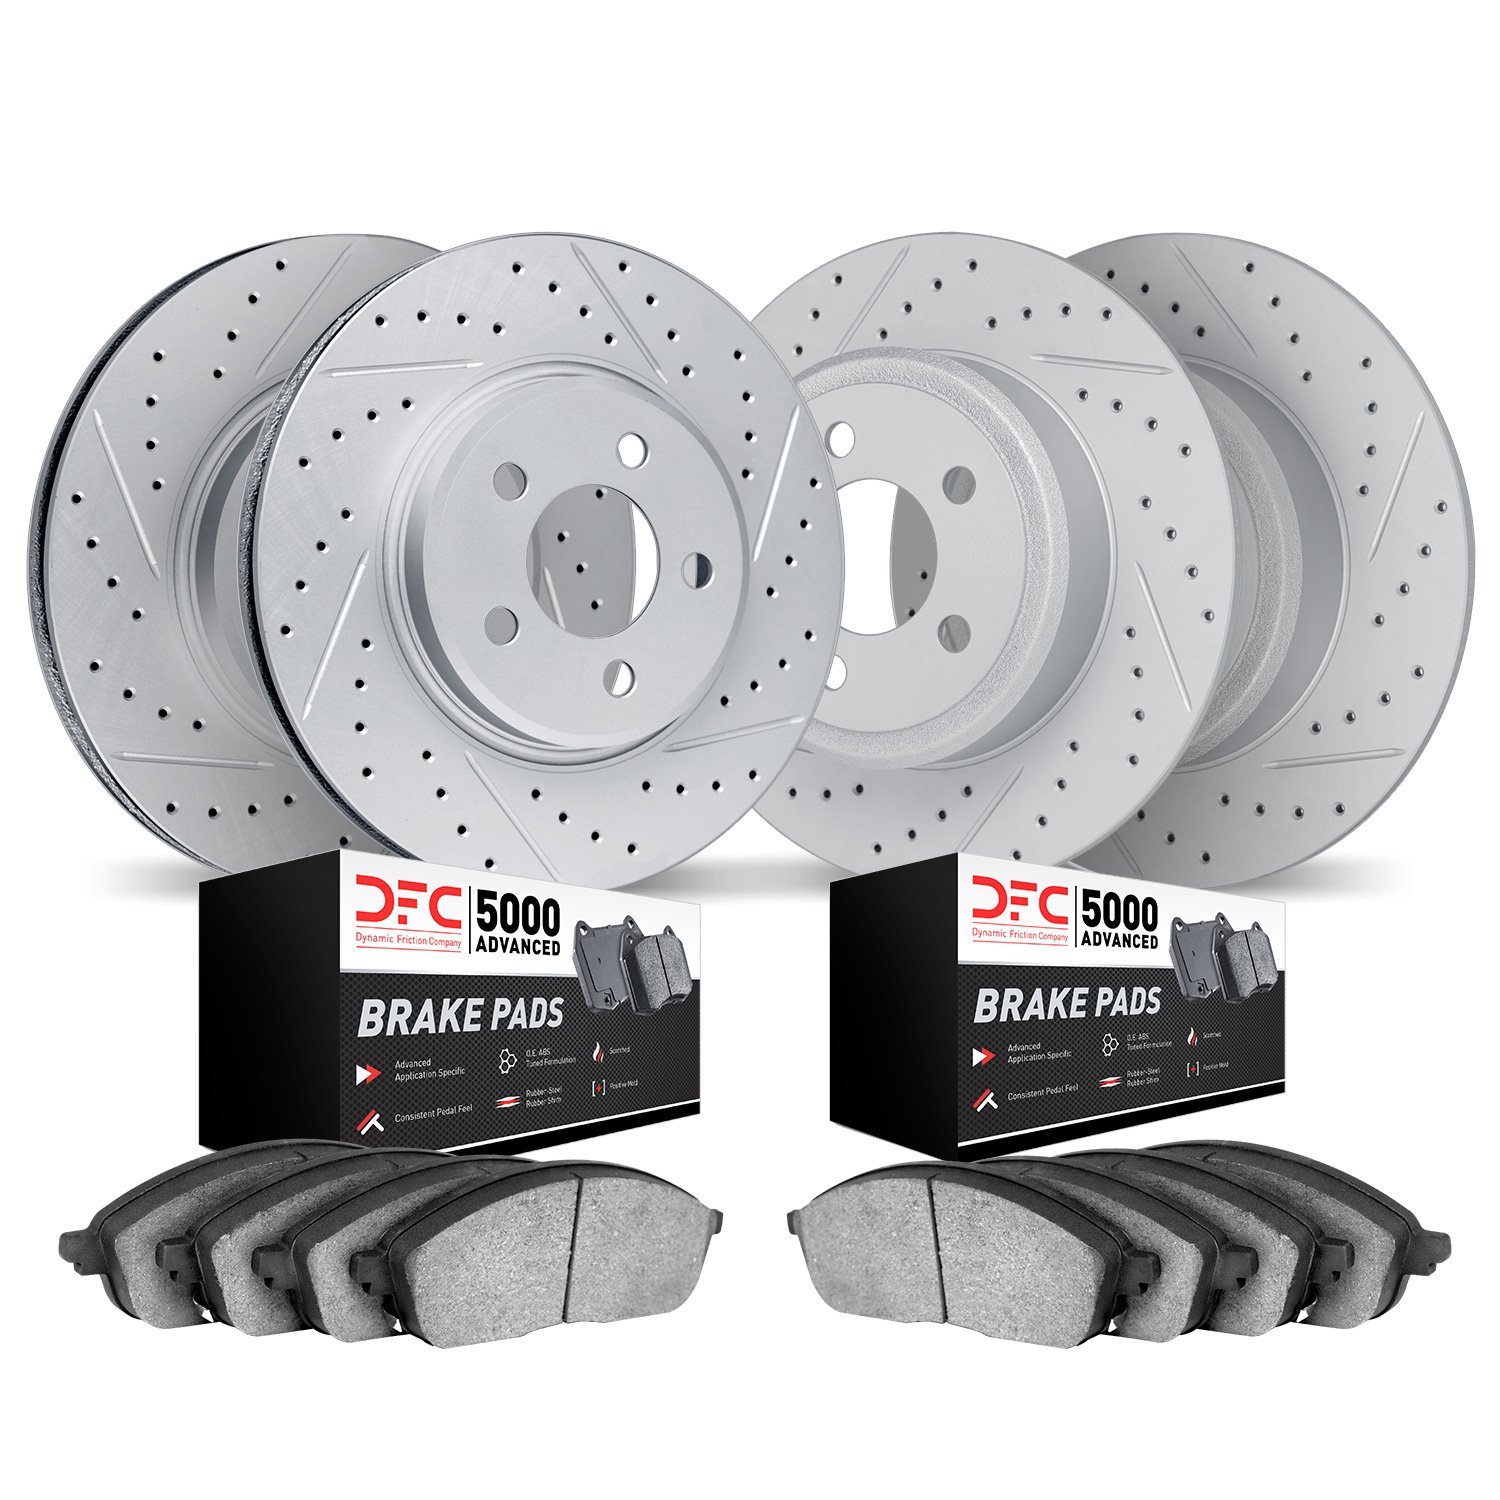 2504-27000 Geoperformance Drilled/Slotted Rotors w/5000 Advanced Brake Pads Kit, 1976-1993 Volvo, Position: Front and Rear